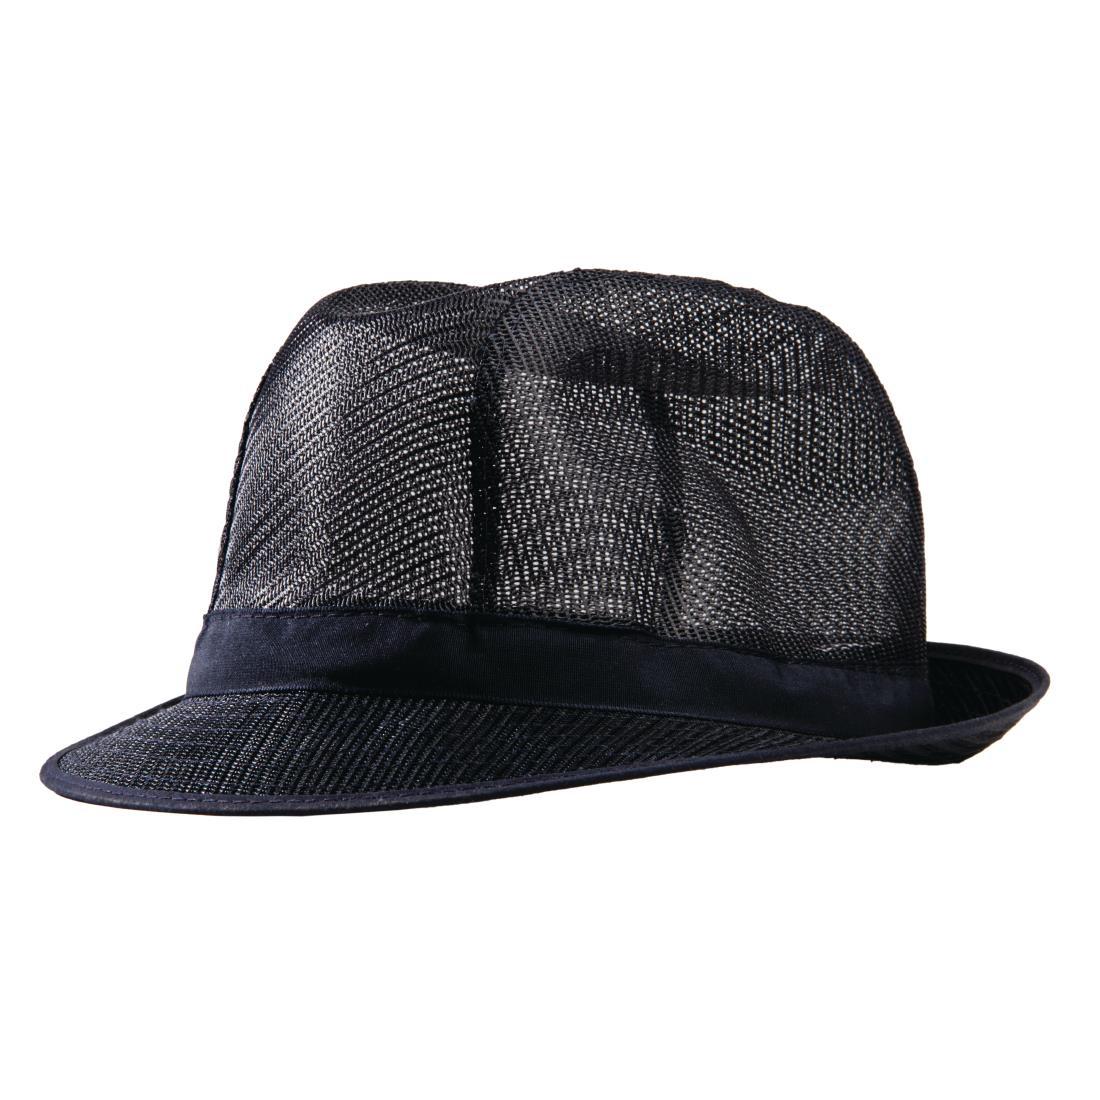 Trilby Hat with Snood Navy Blue M - A654-M  - 2